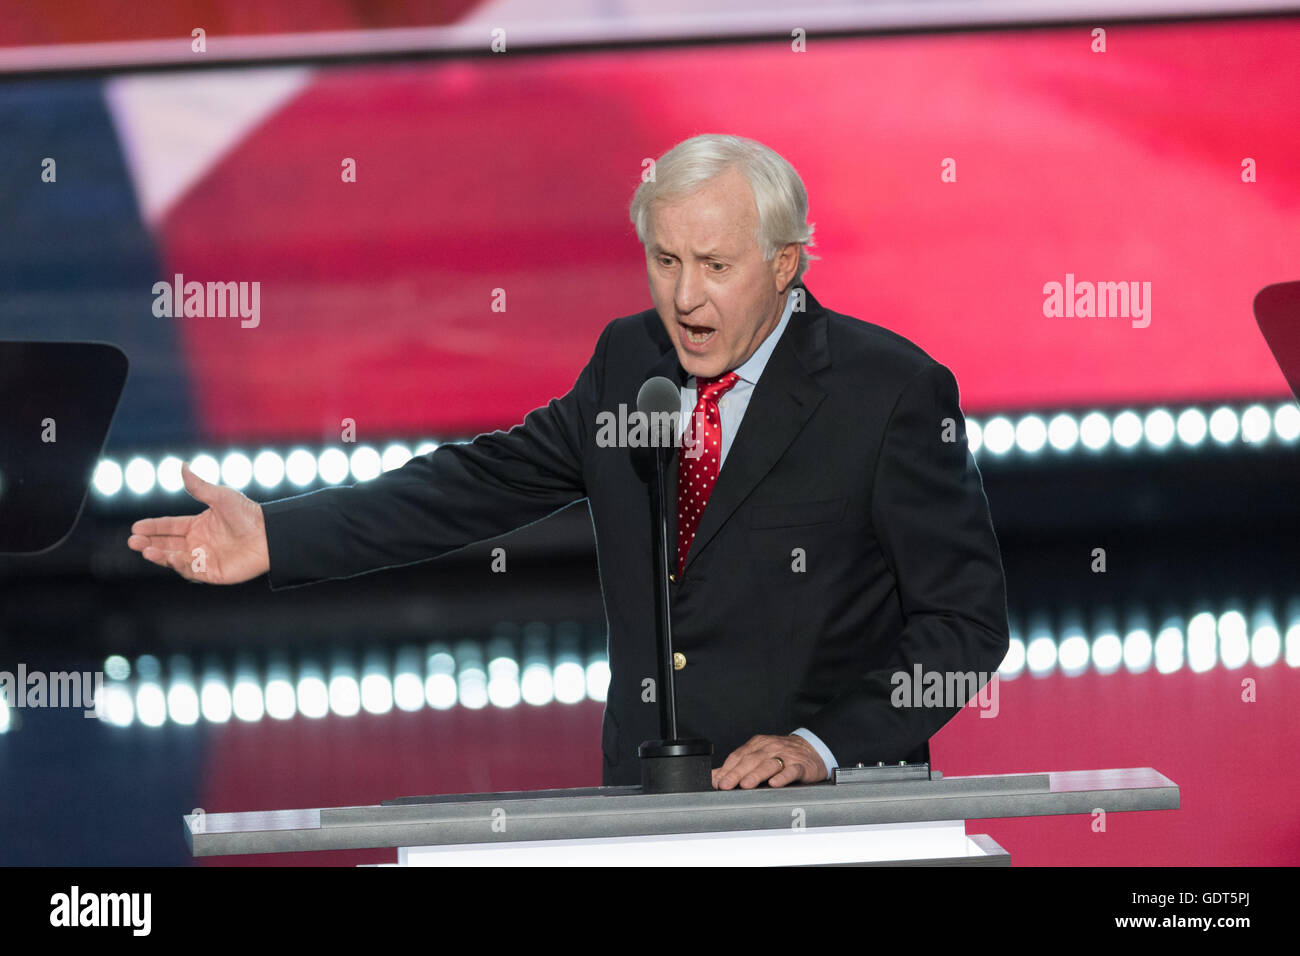 Former National Football League quarterback Fran Tarkenton address delegates on the final day of the Republican National Convention July 21, 2016 in Cleveland, Ohio. Stock Photo